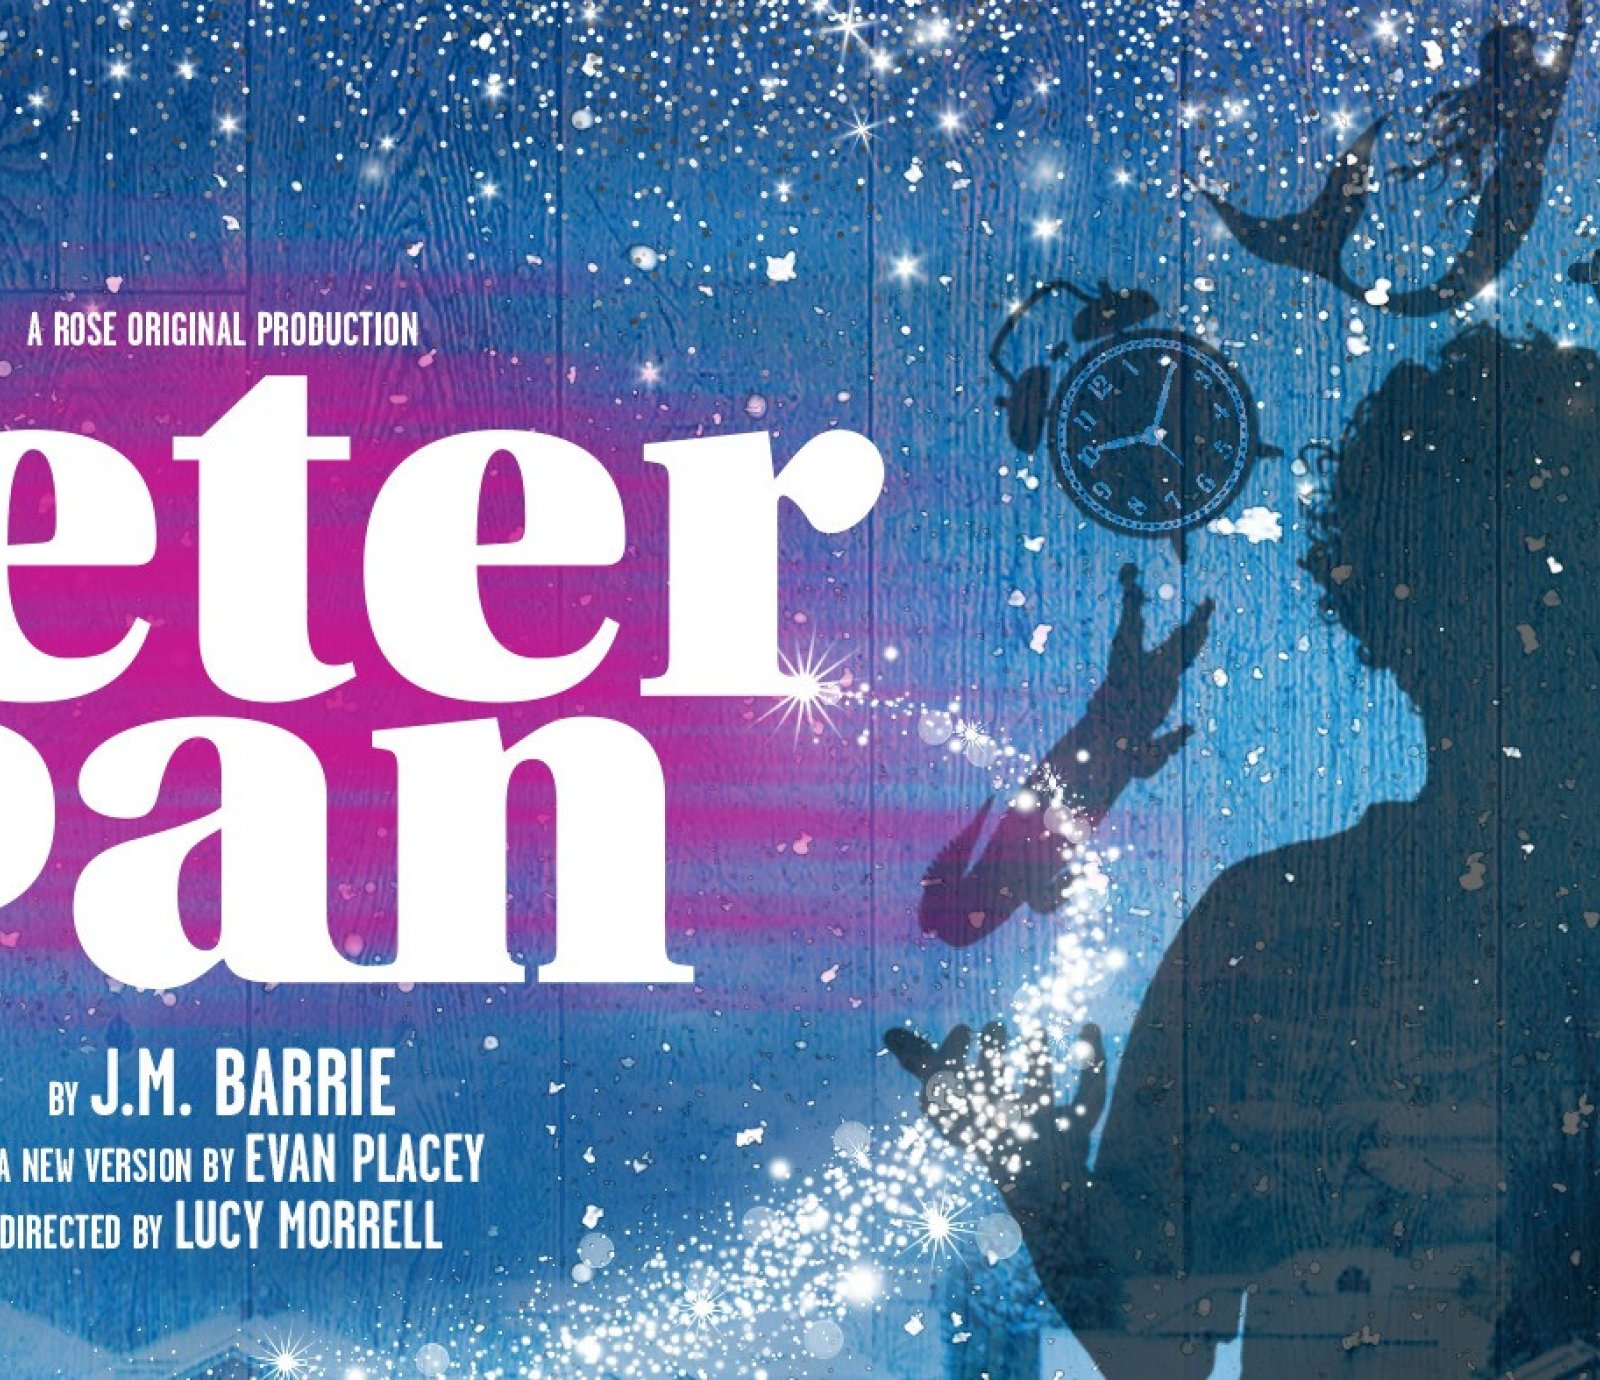 Peter Pan - Rose Theatre Production